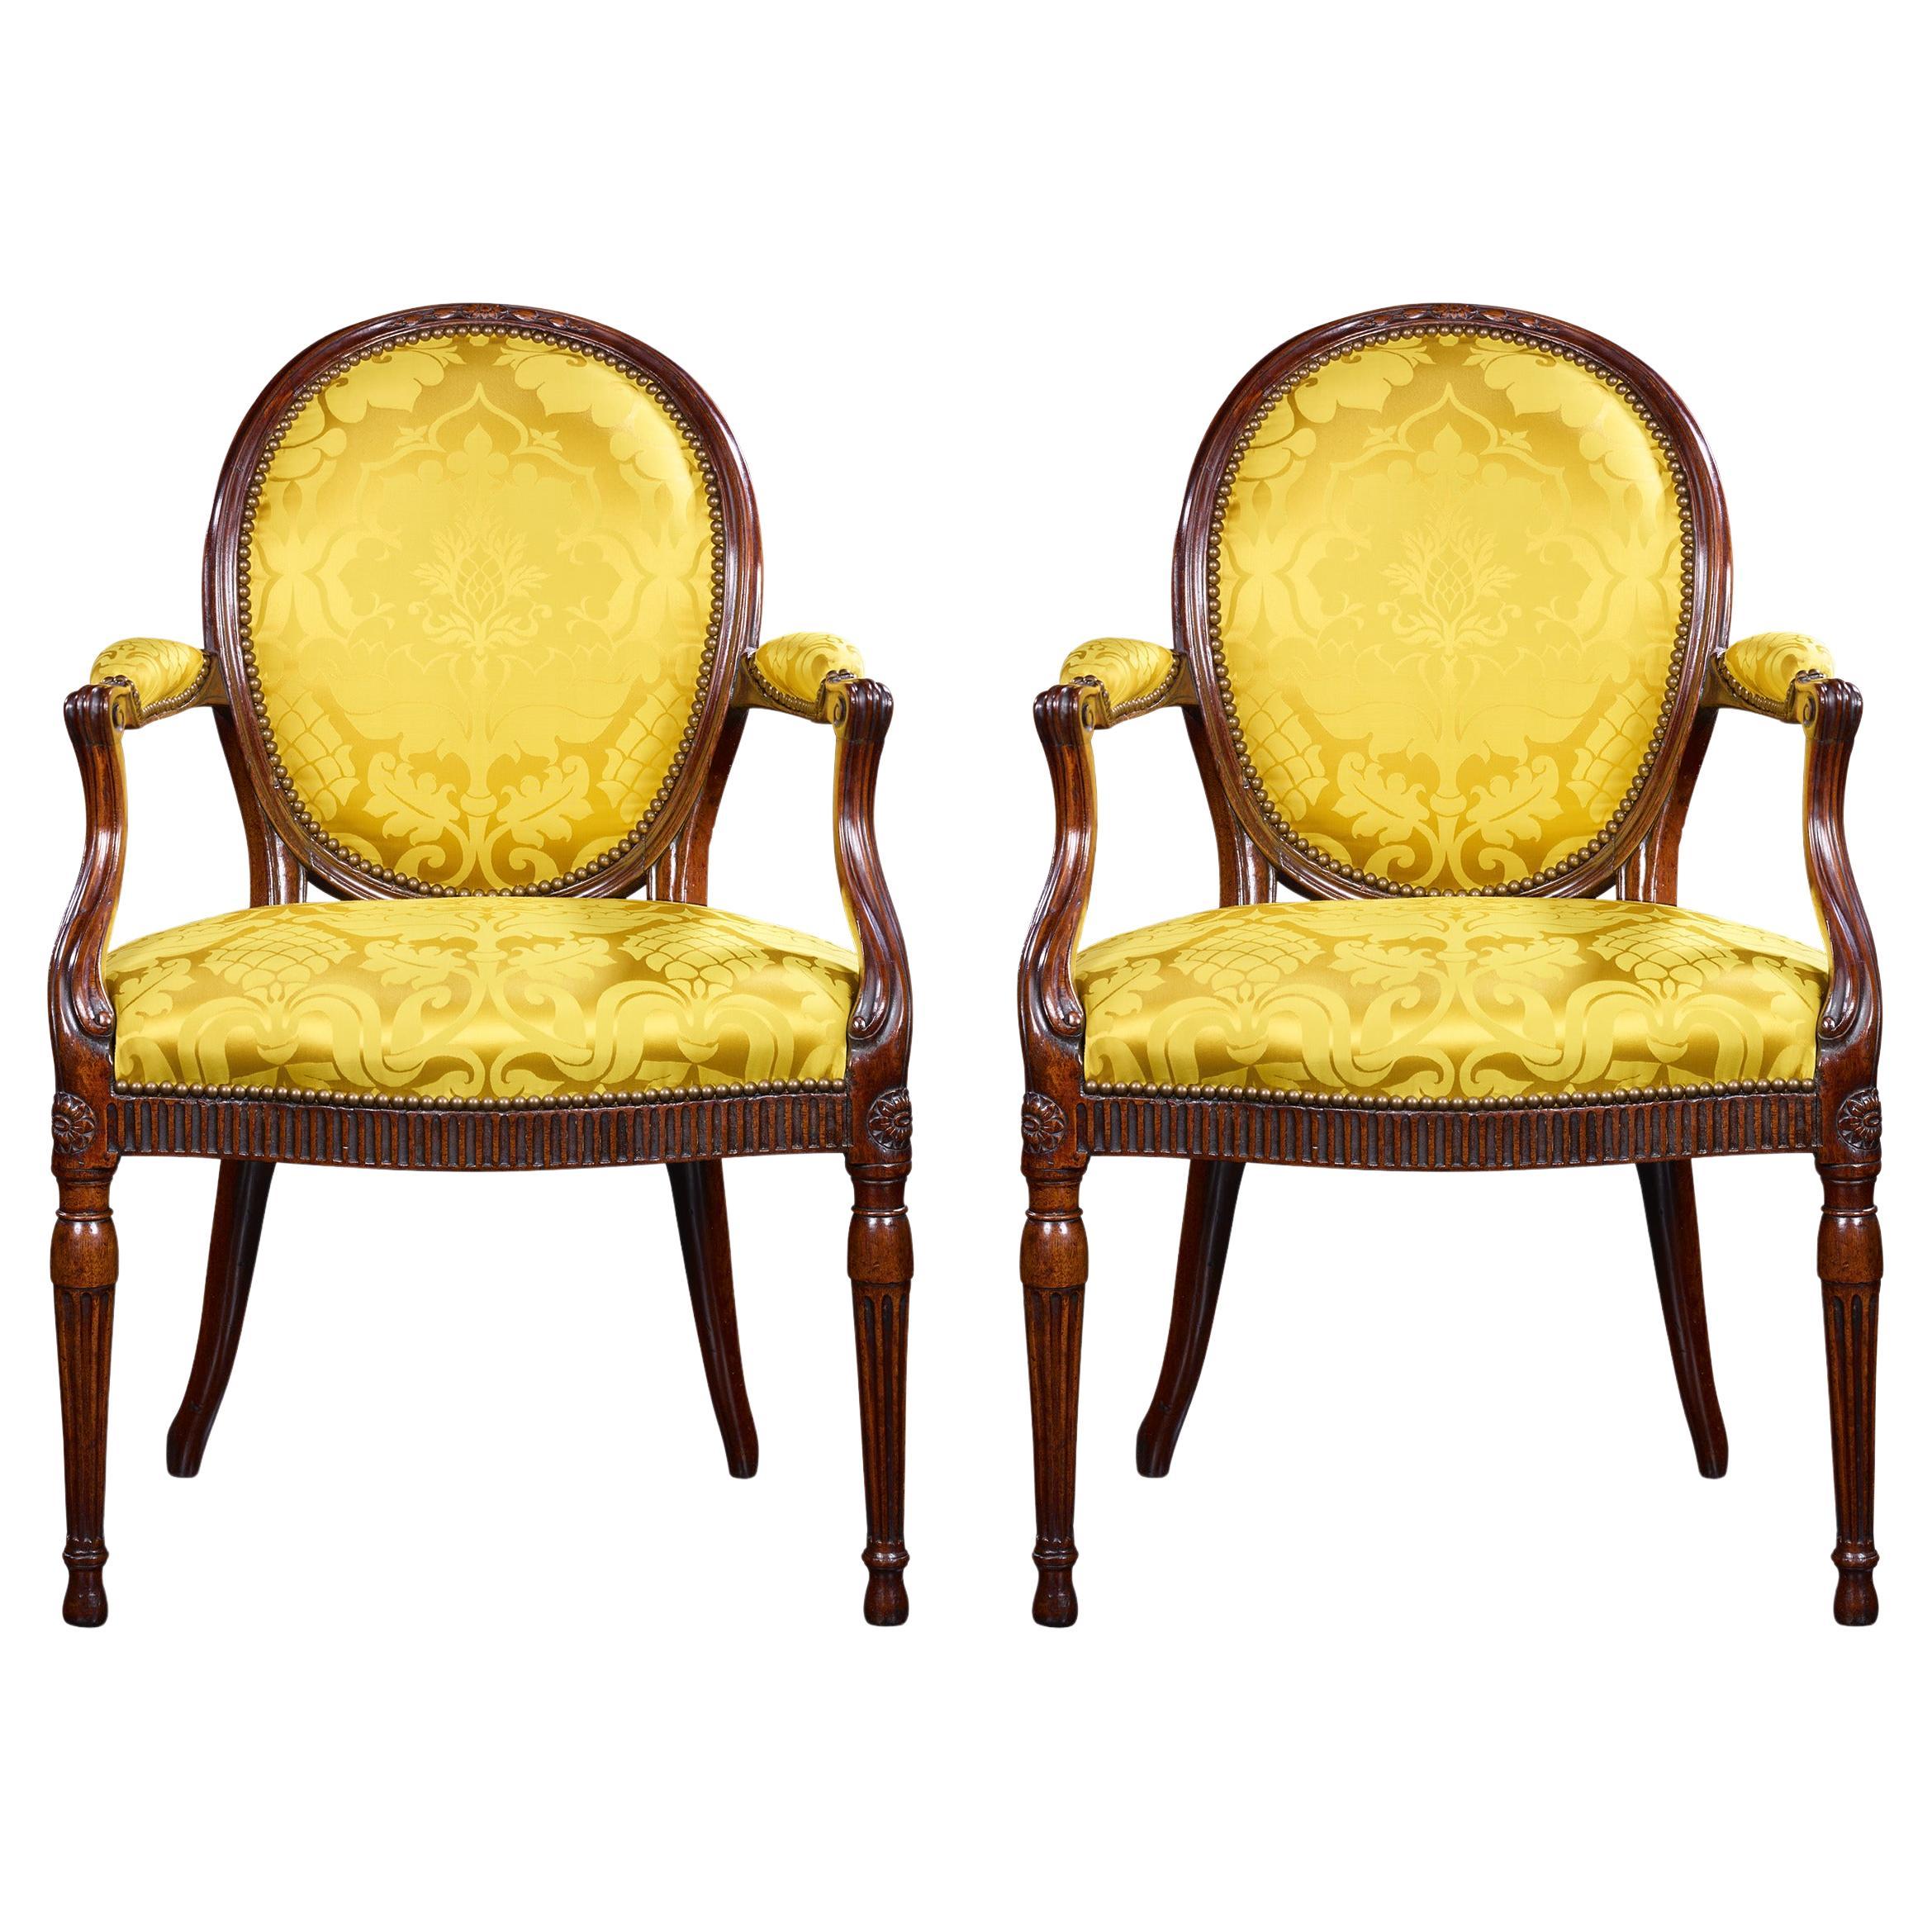 Pair Of Mahogany Armchairs By Thomas Chippendale